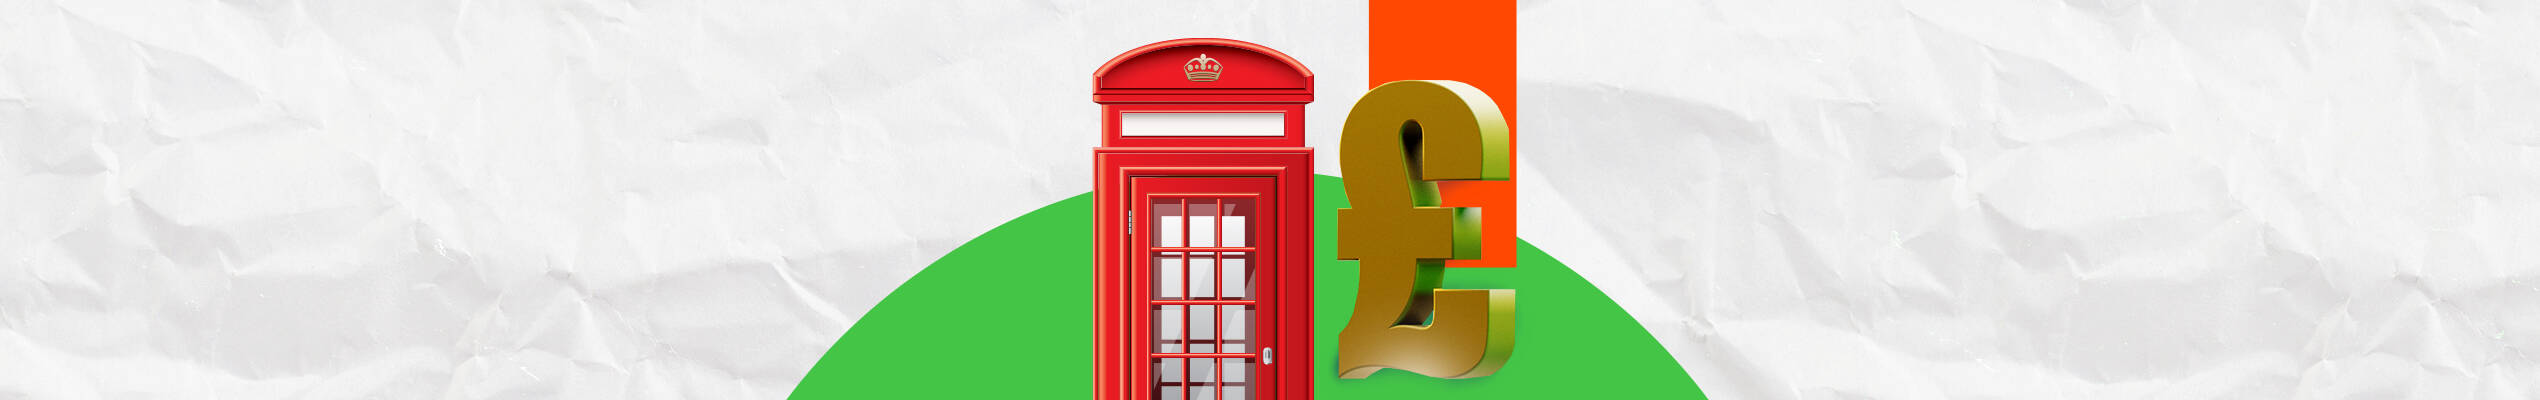 GBP vs EUR and USD: strategic look